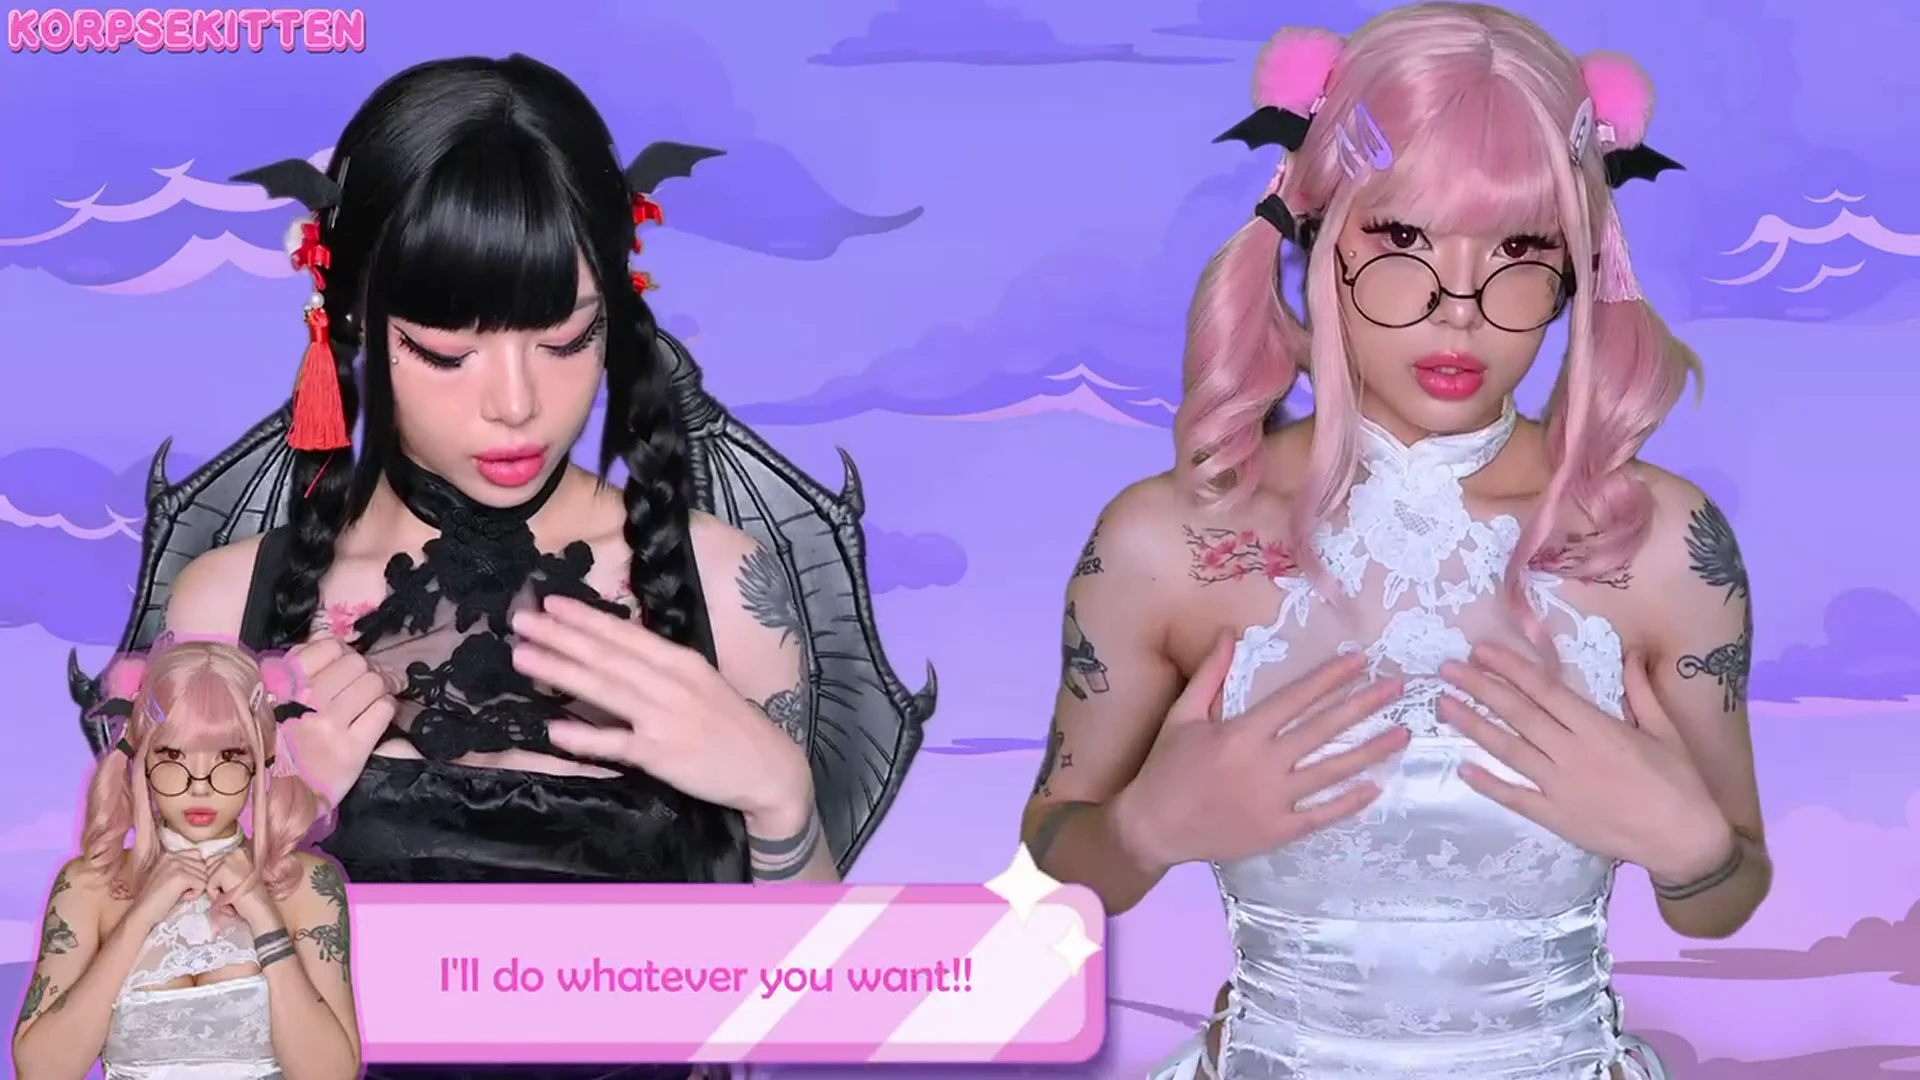 My ‘Choose Your Succubus’ video is out! (linked below)